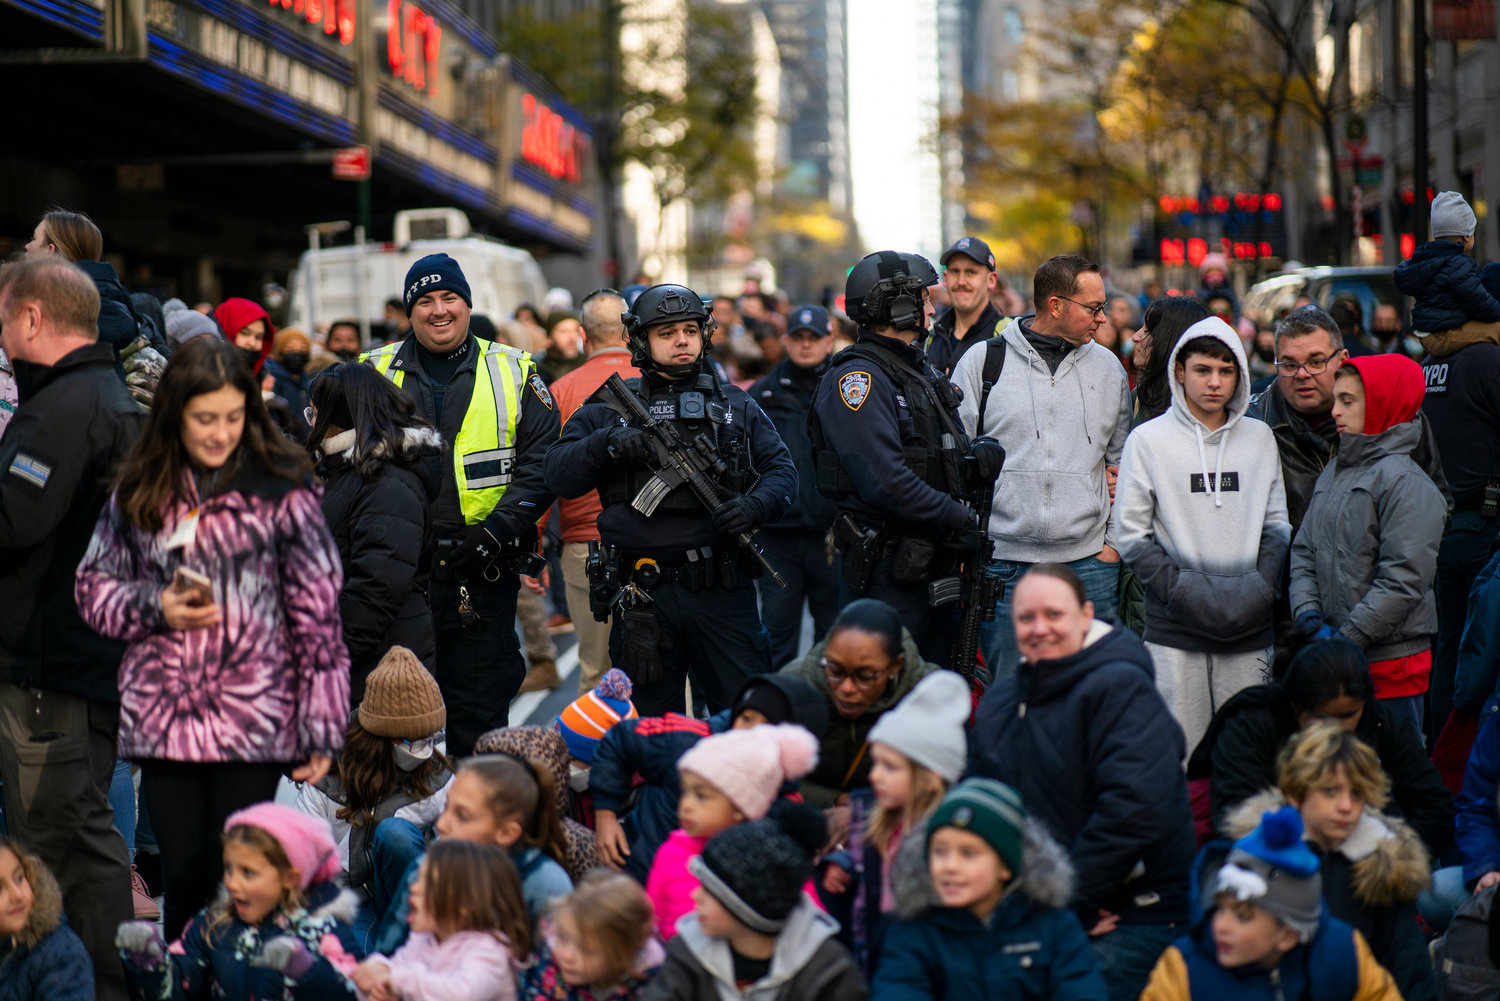 POPULAR SPOT — NYPD officers stand guard next to Radio City Music Hall as people try to watch the Macy’s Thanksgiving Day Parade Thursday in New York.